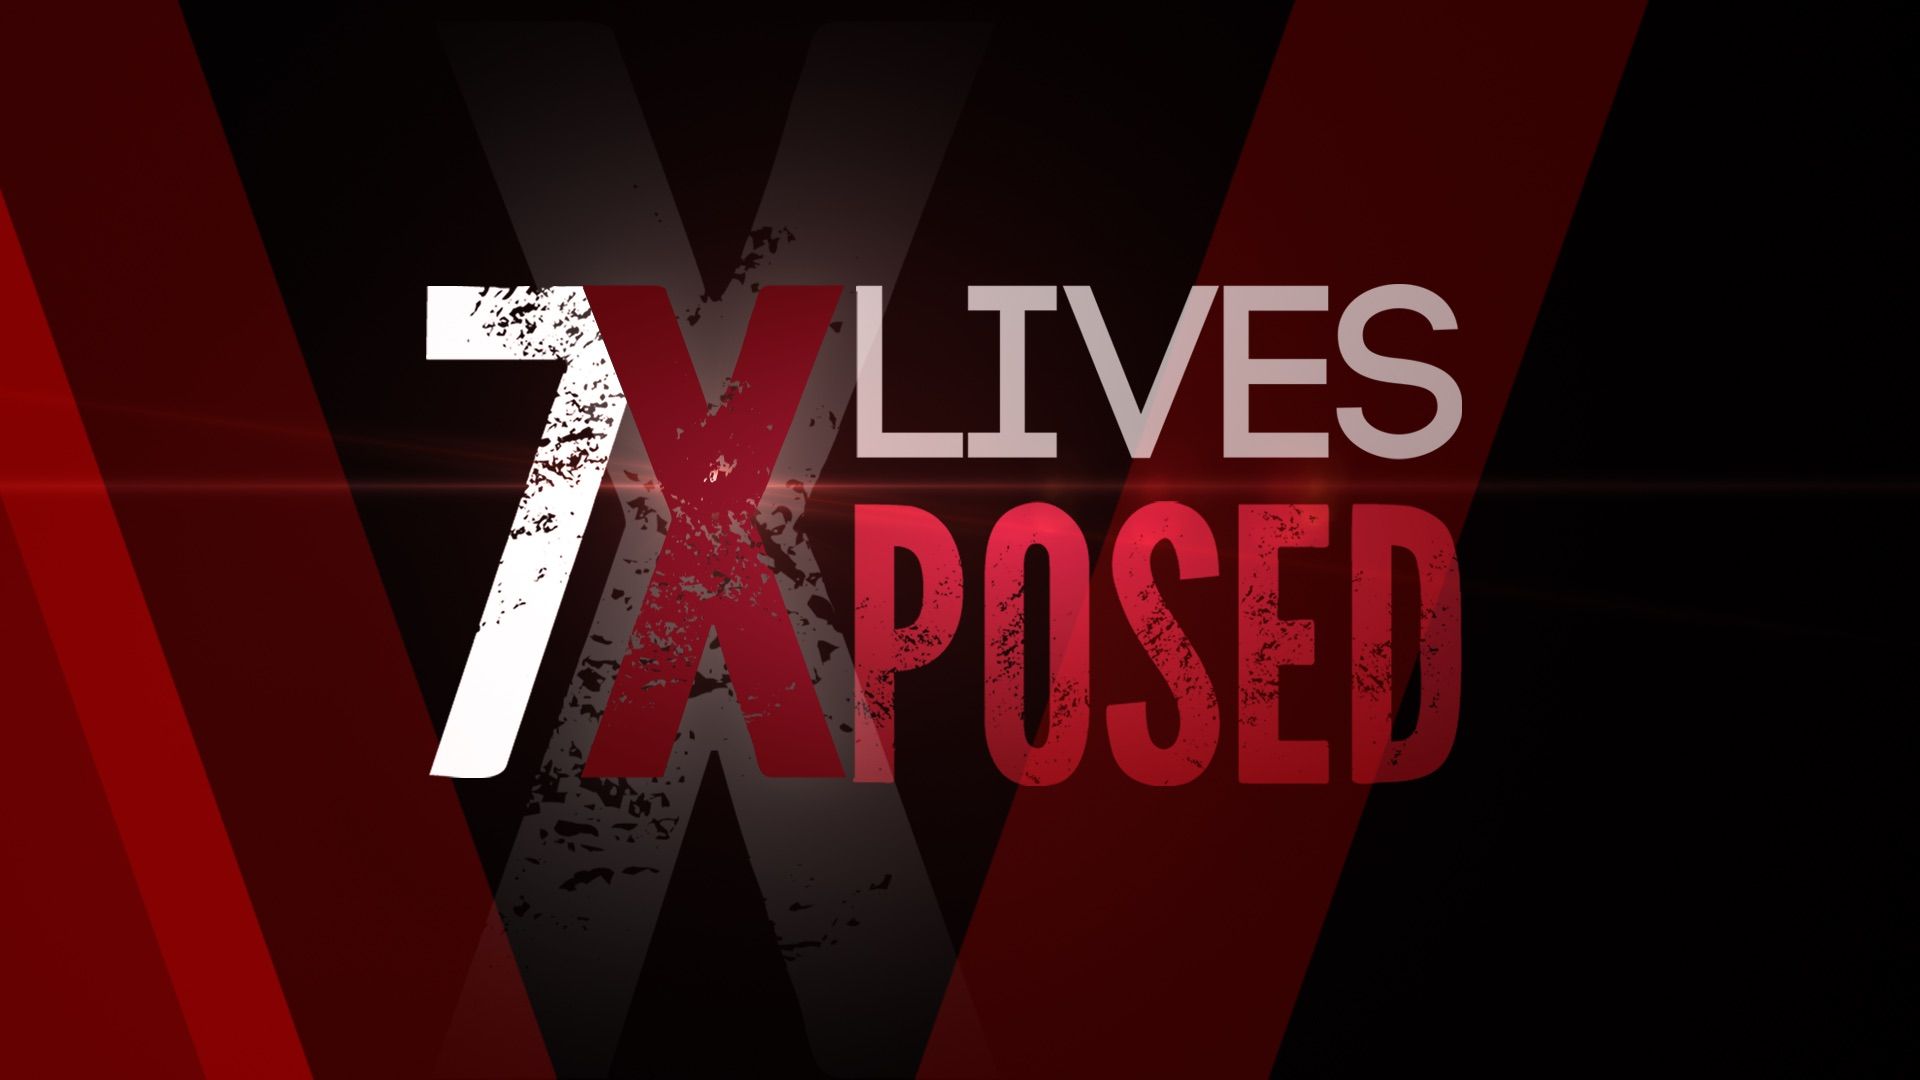 dina mercogliano recommends 7 lives xposed online pic